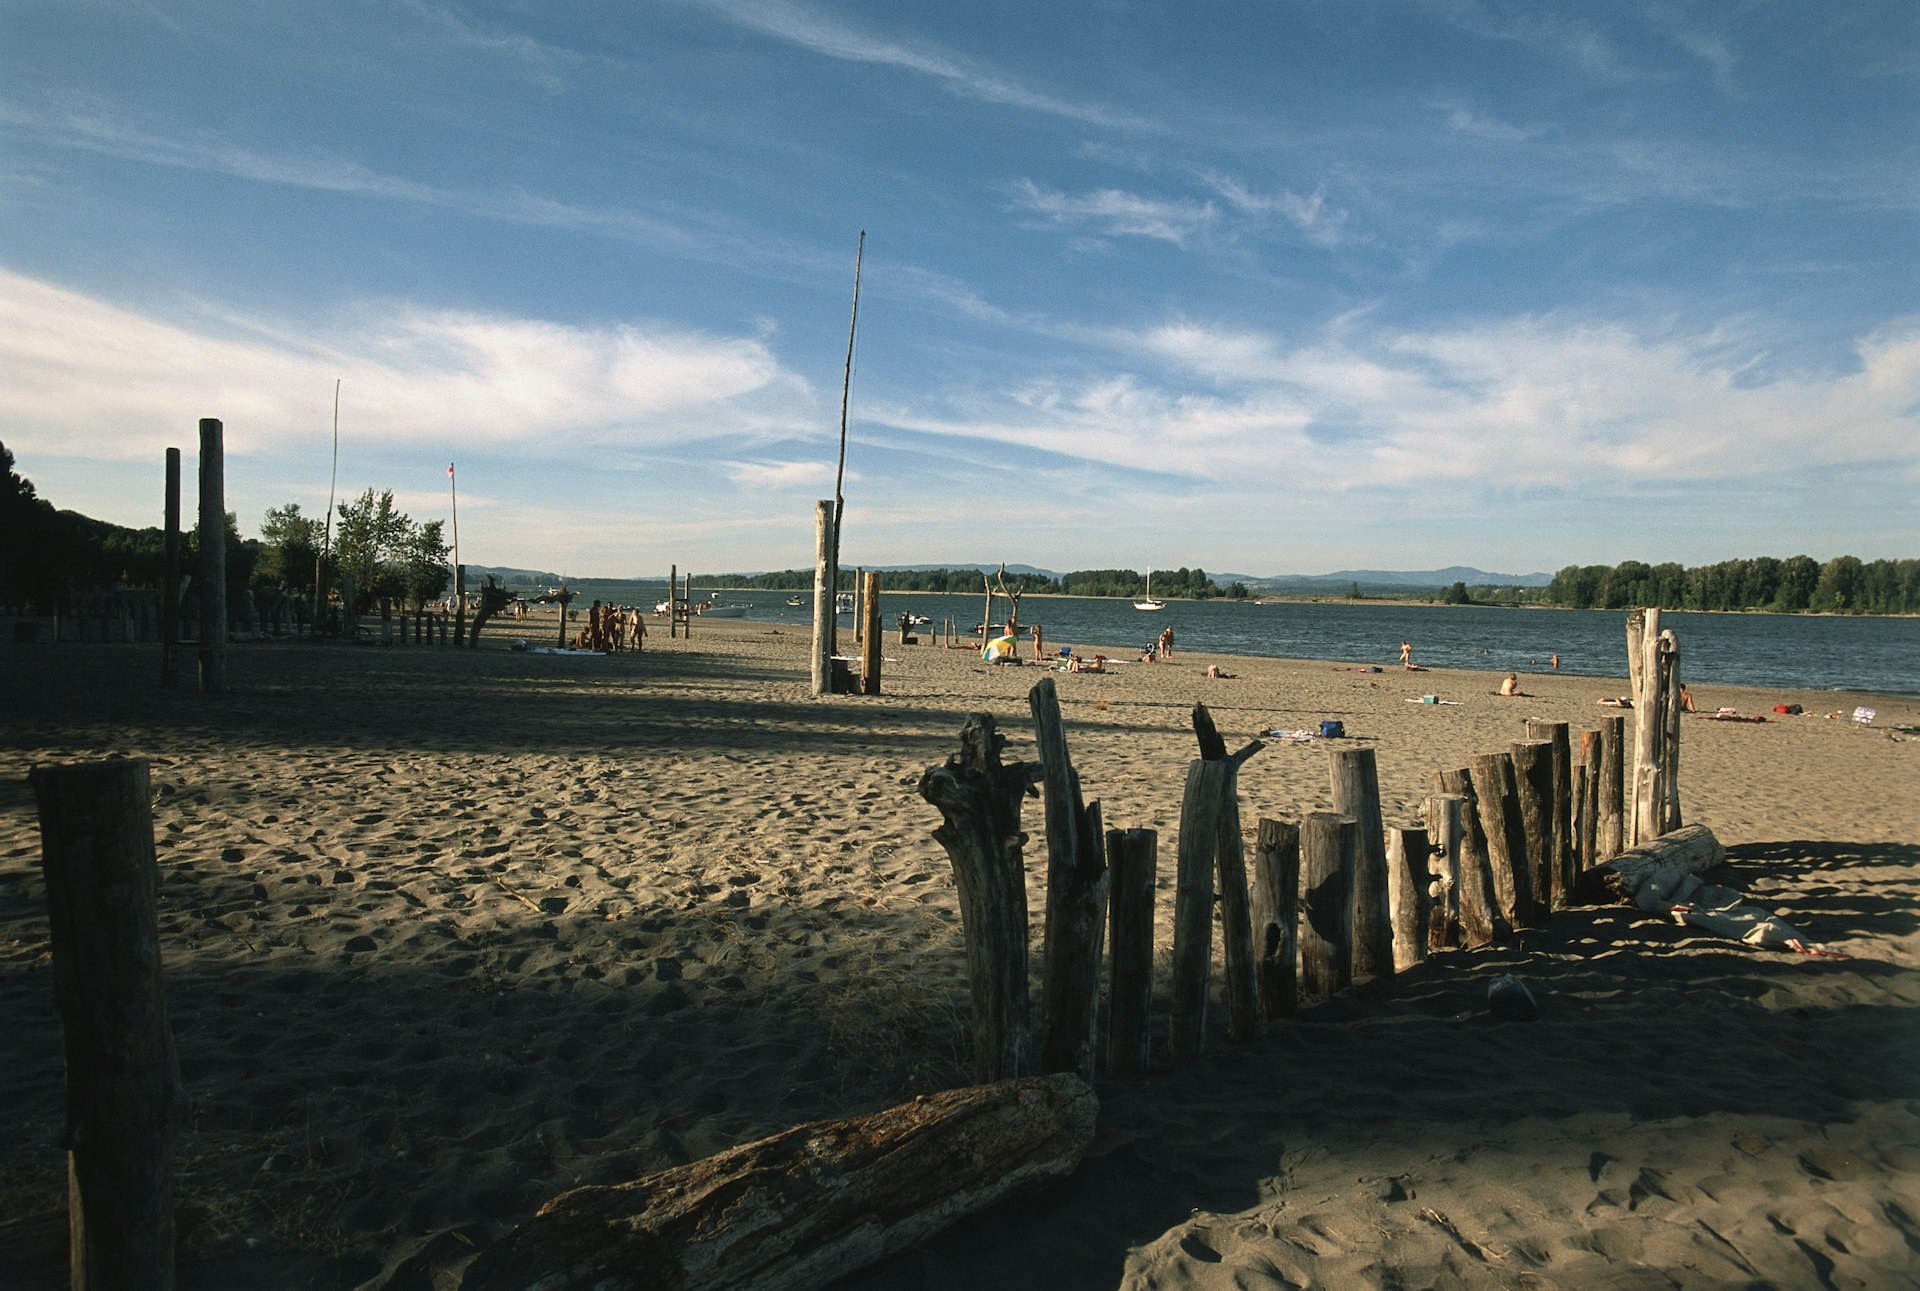 USA, Pacific Northwest, Oregon Portland Sauvie Island, people relaxing and remains of log breakwaters on one of several beaches